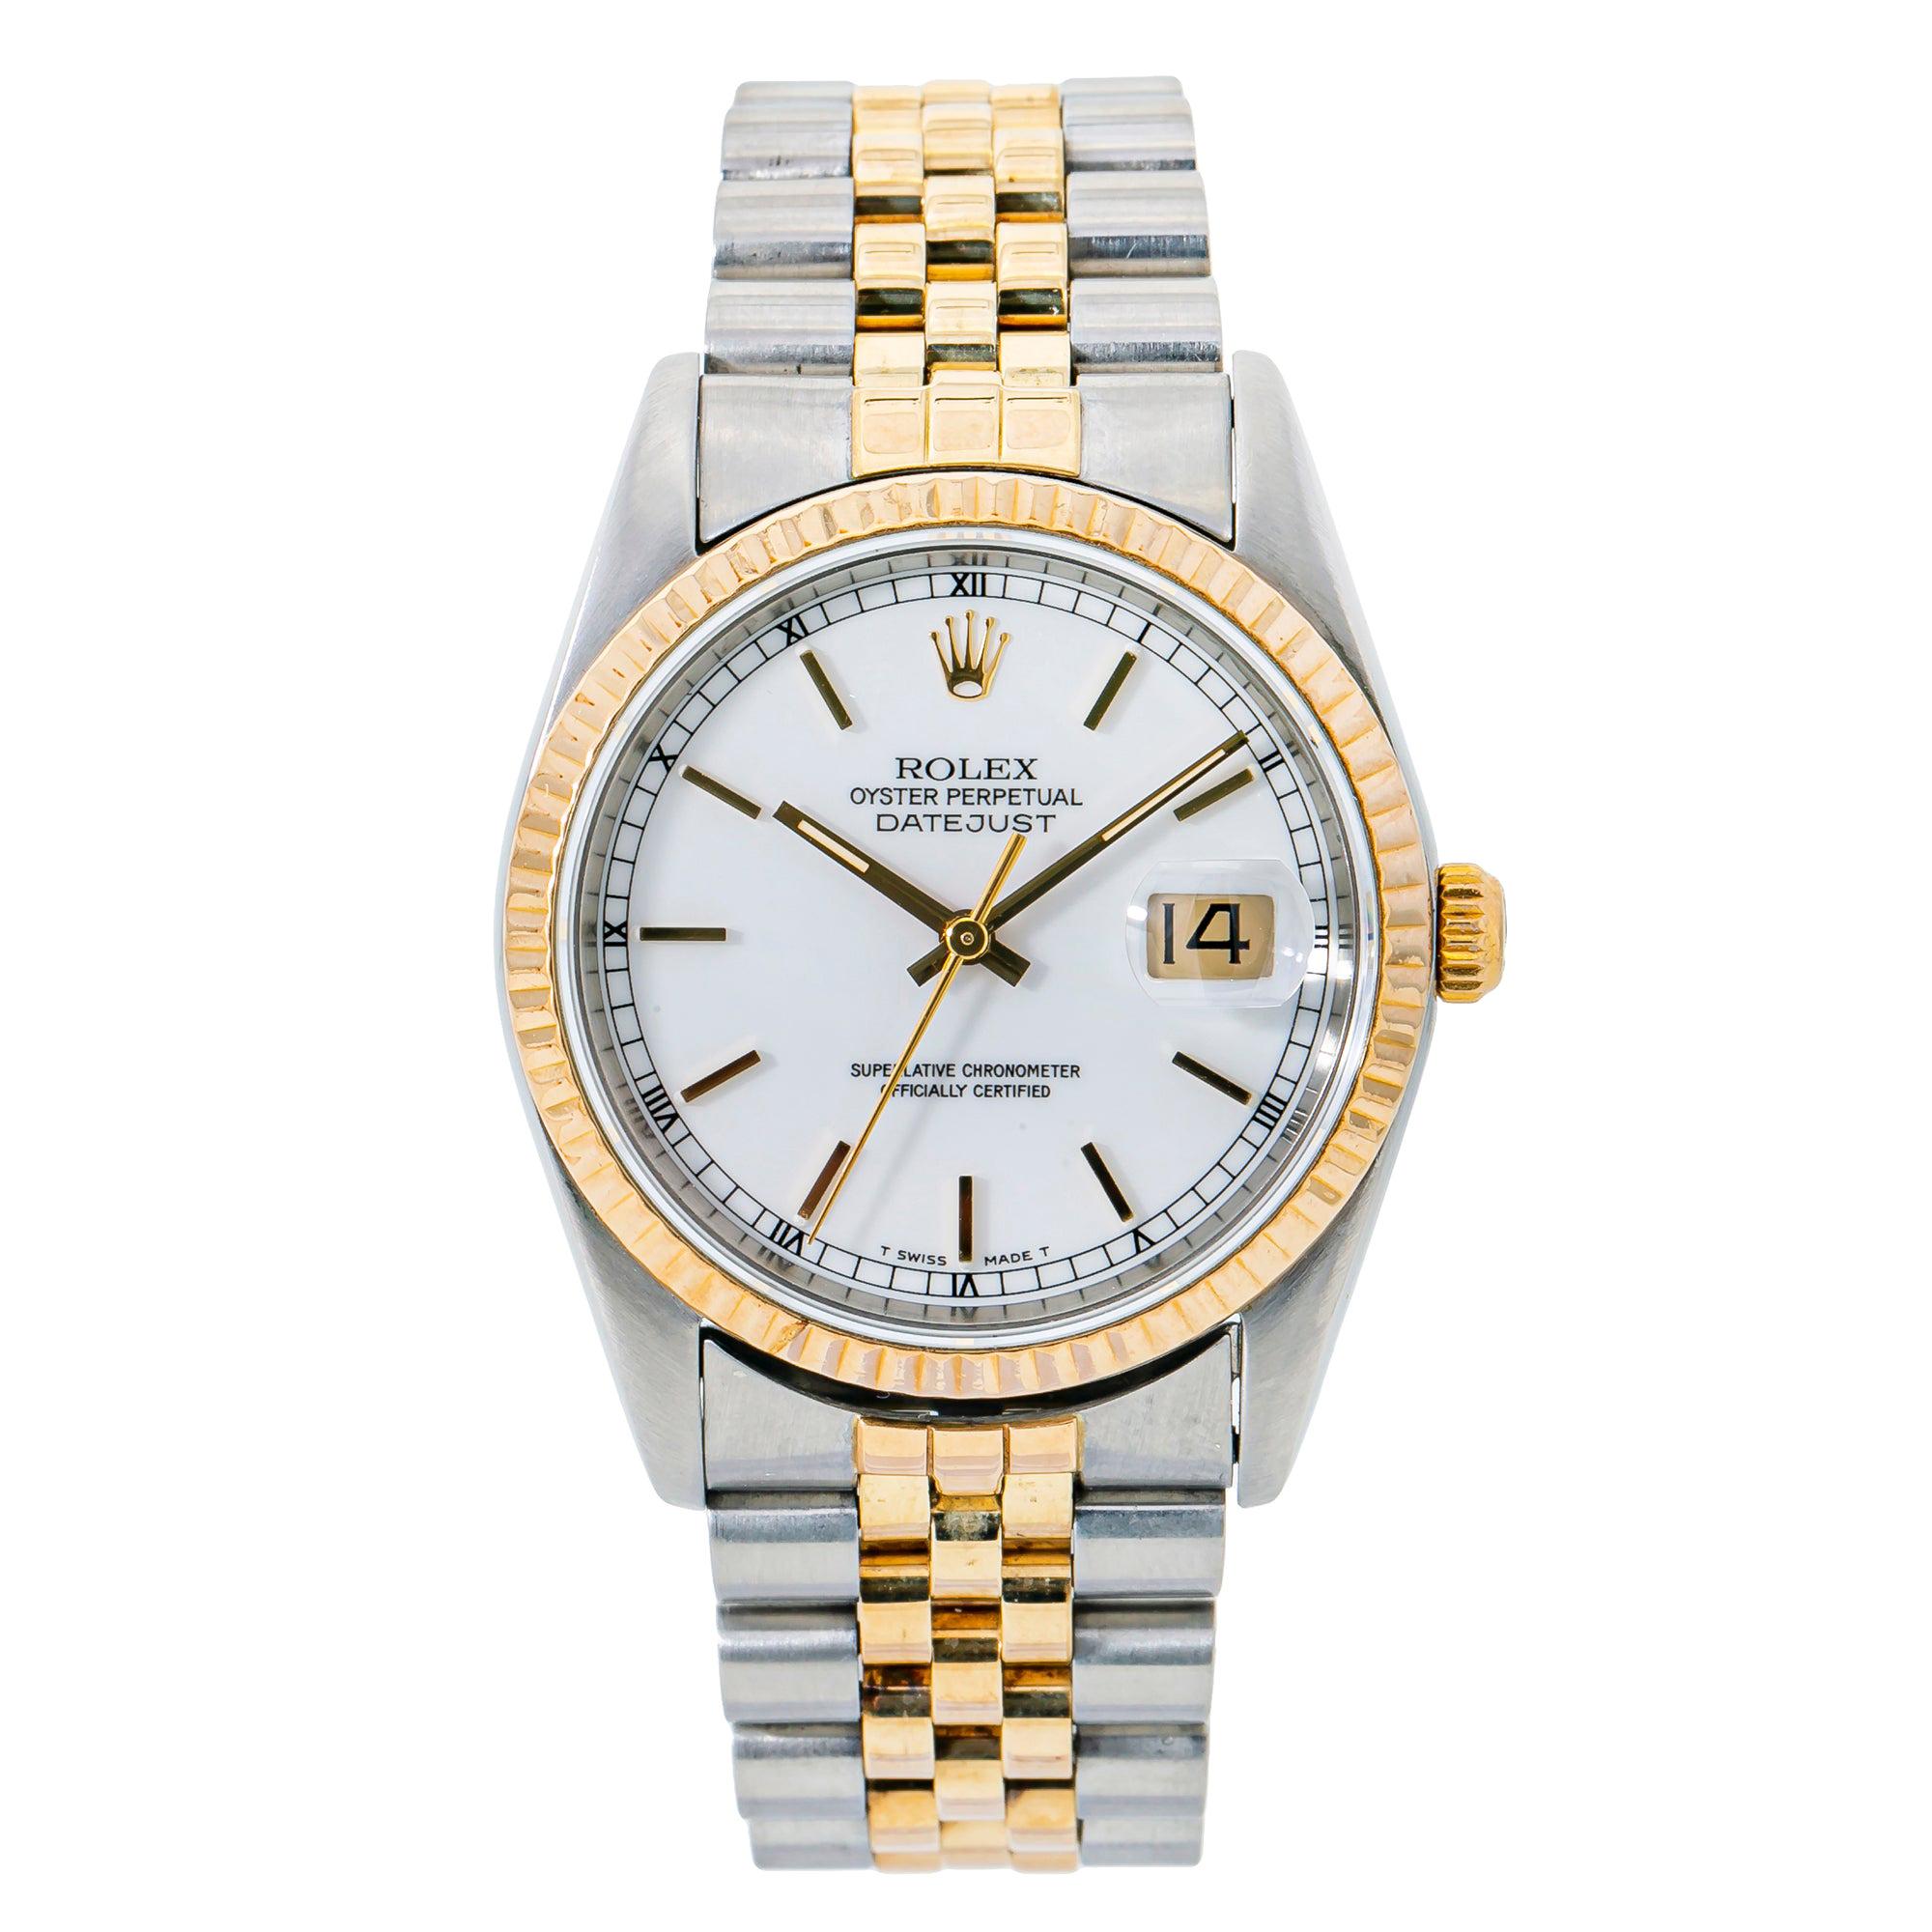 Rolex Datejust Jubilee 16233 2-Tone 18K Yellow Gold White Dial